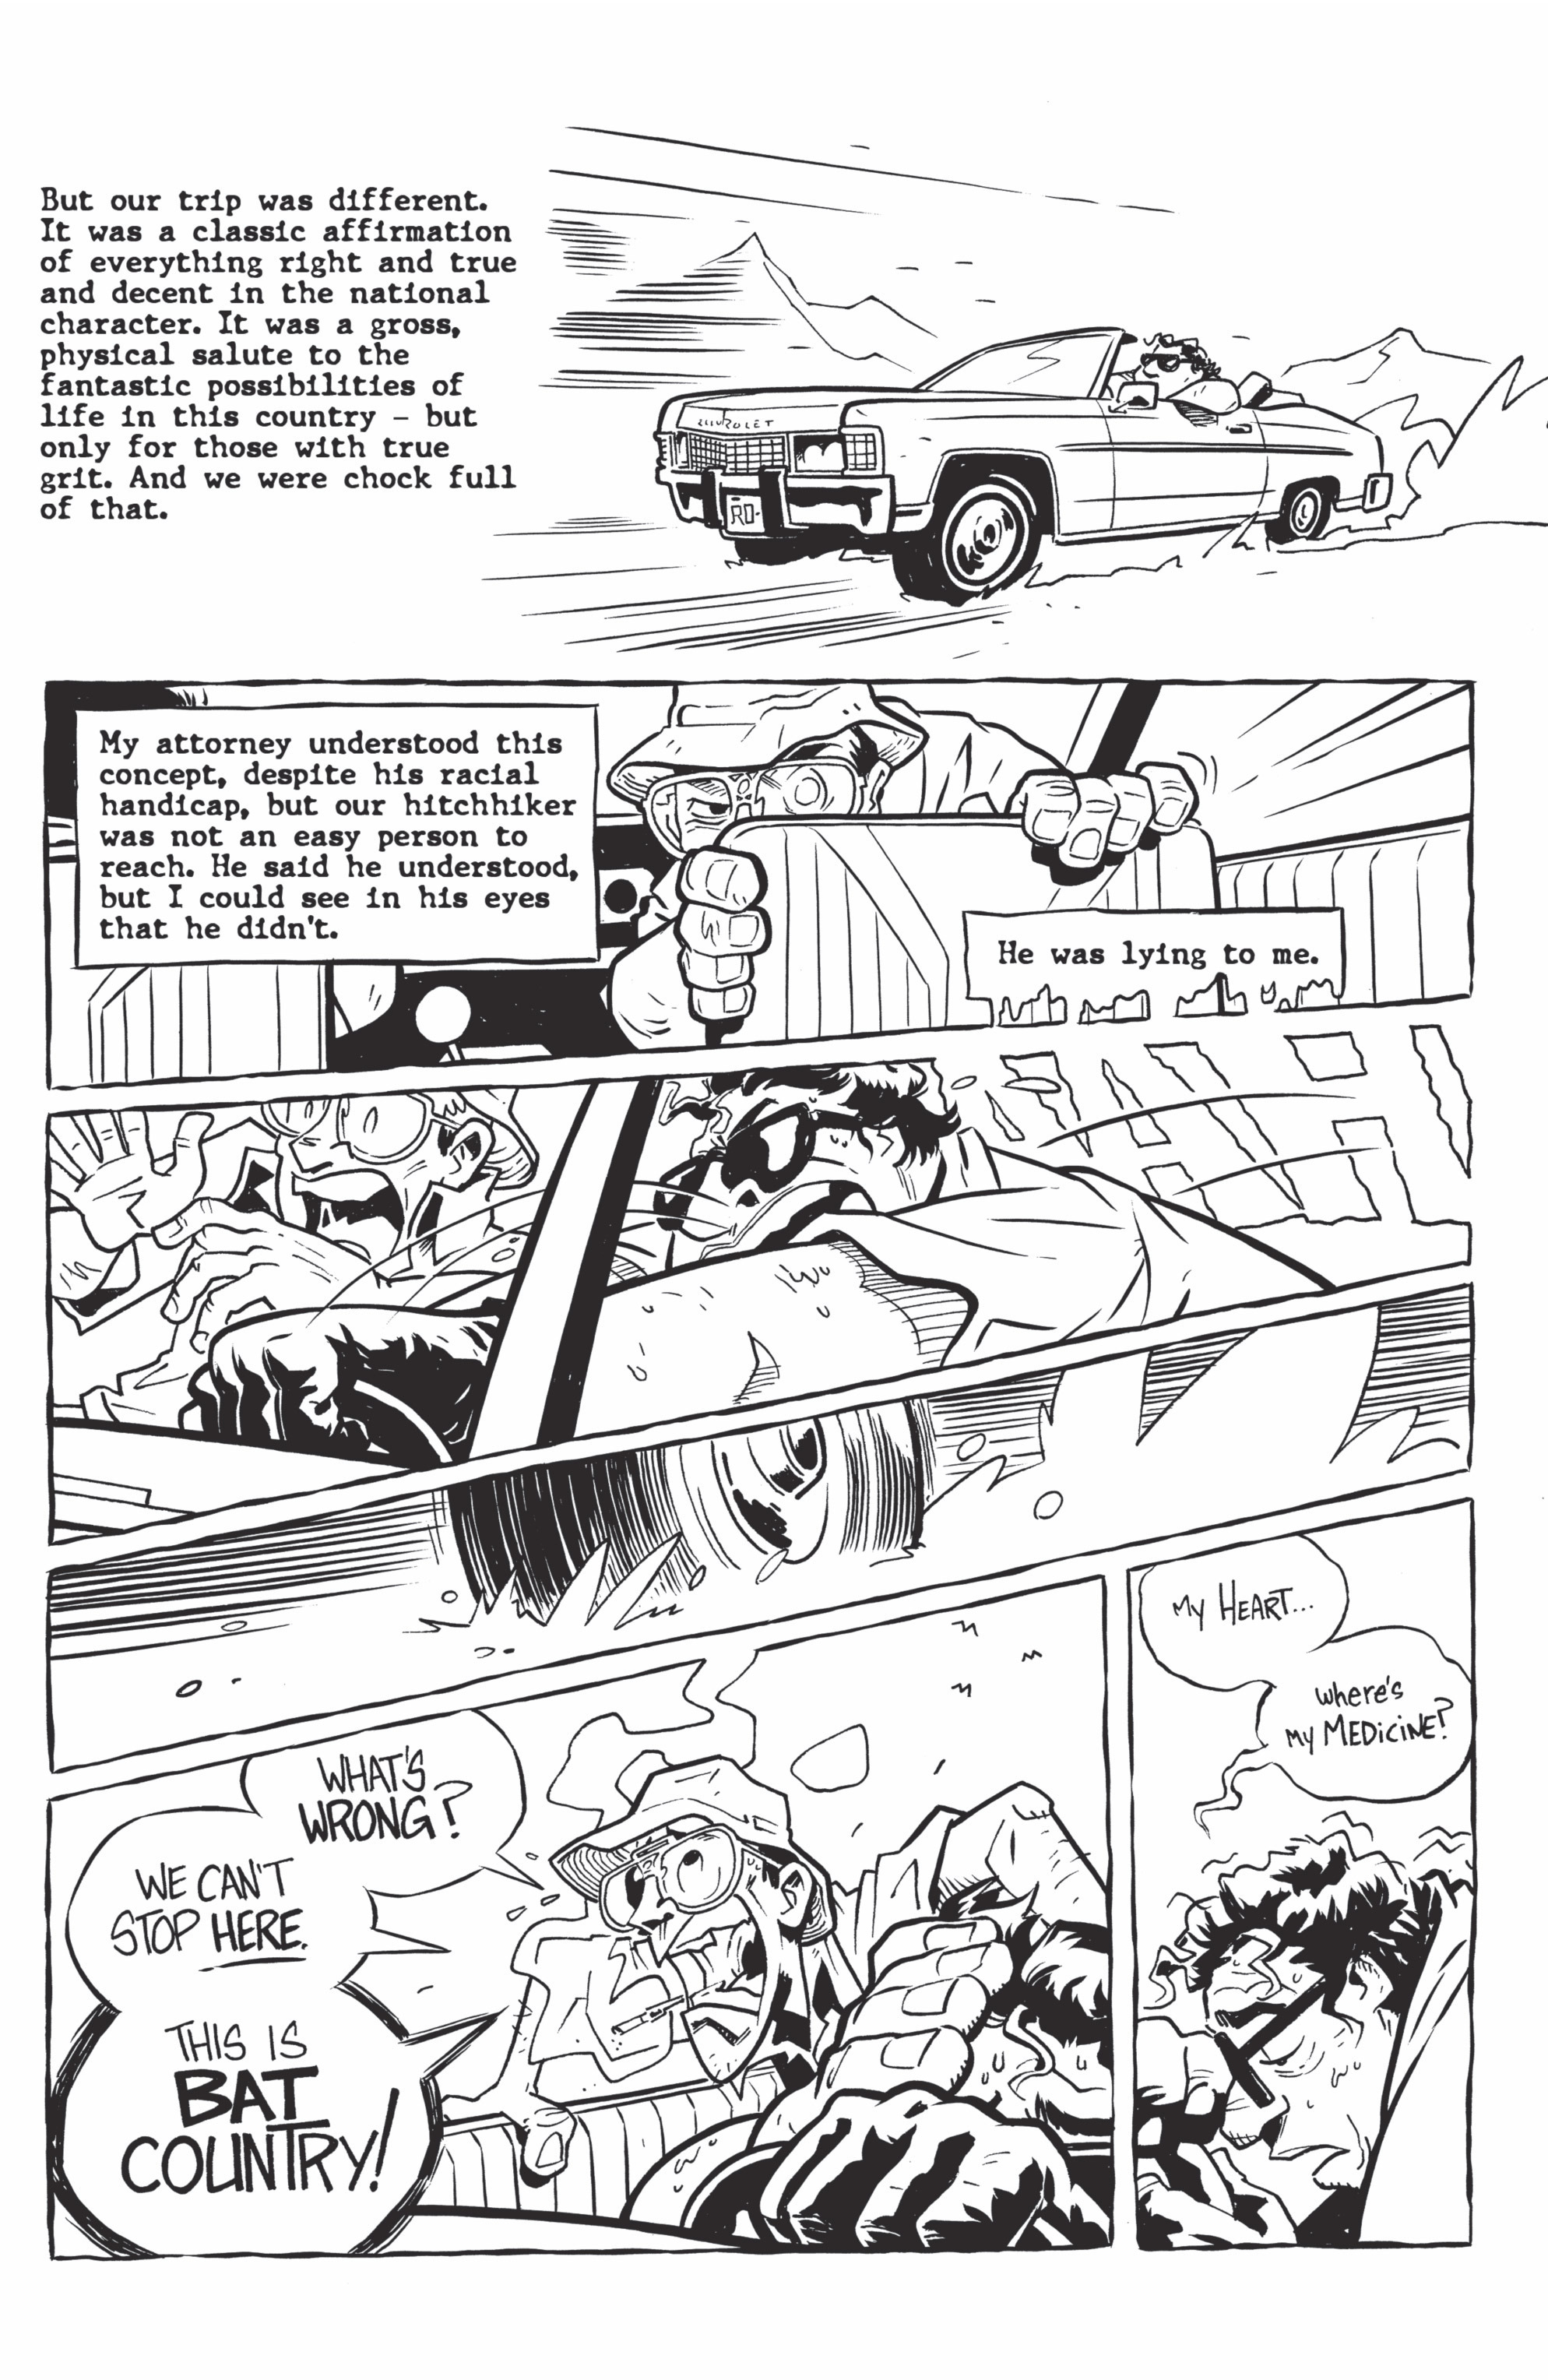 Read online Hunter S. Thompson's Fear and Loathing in Las Vegas comic -  Issue #1 - 23